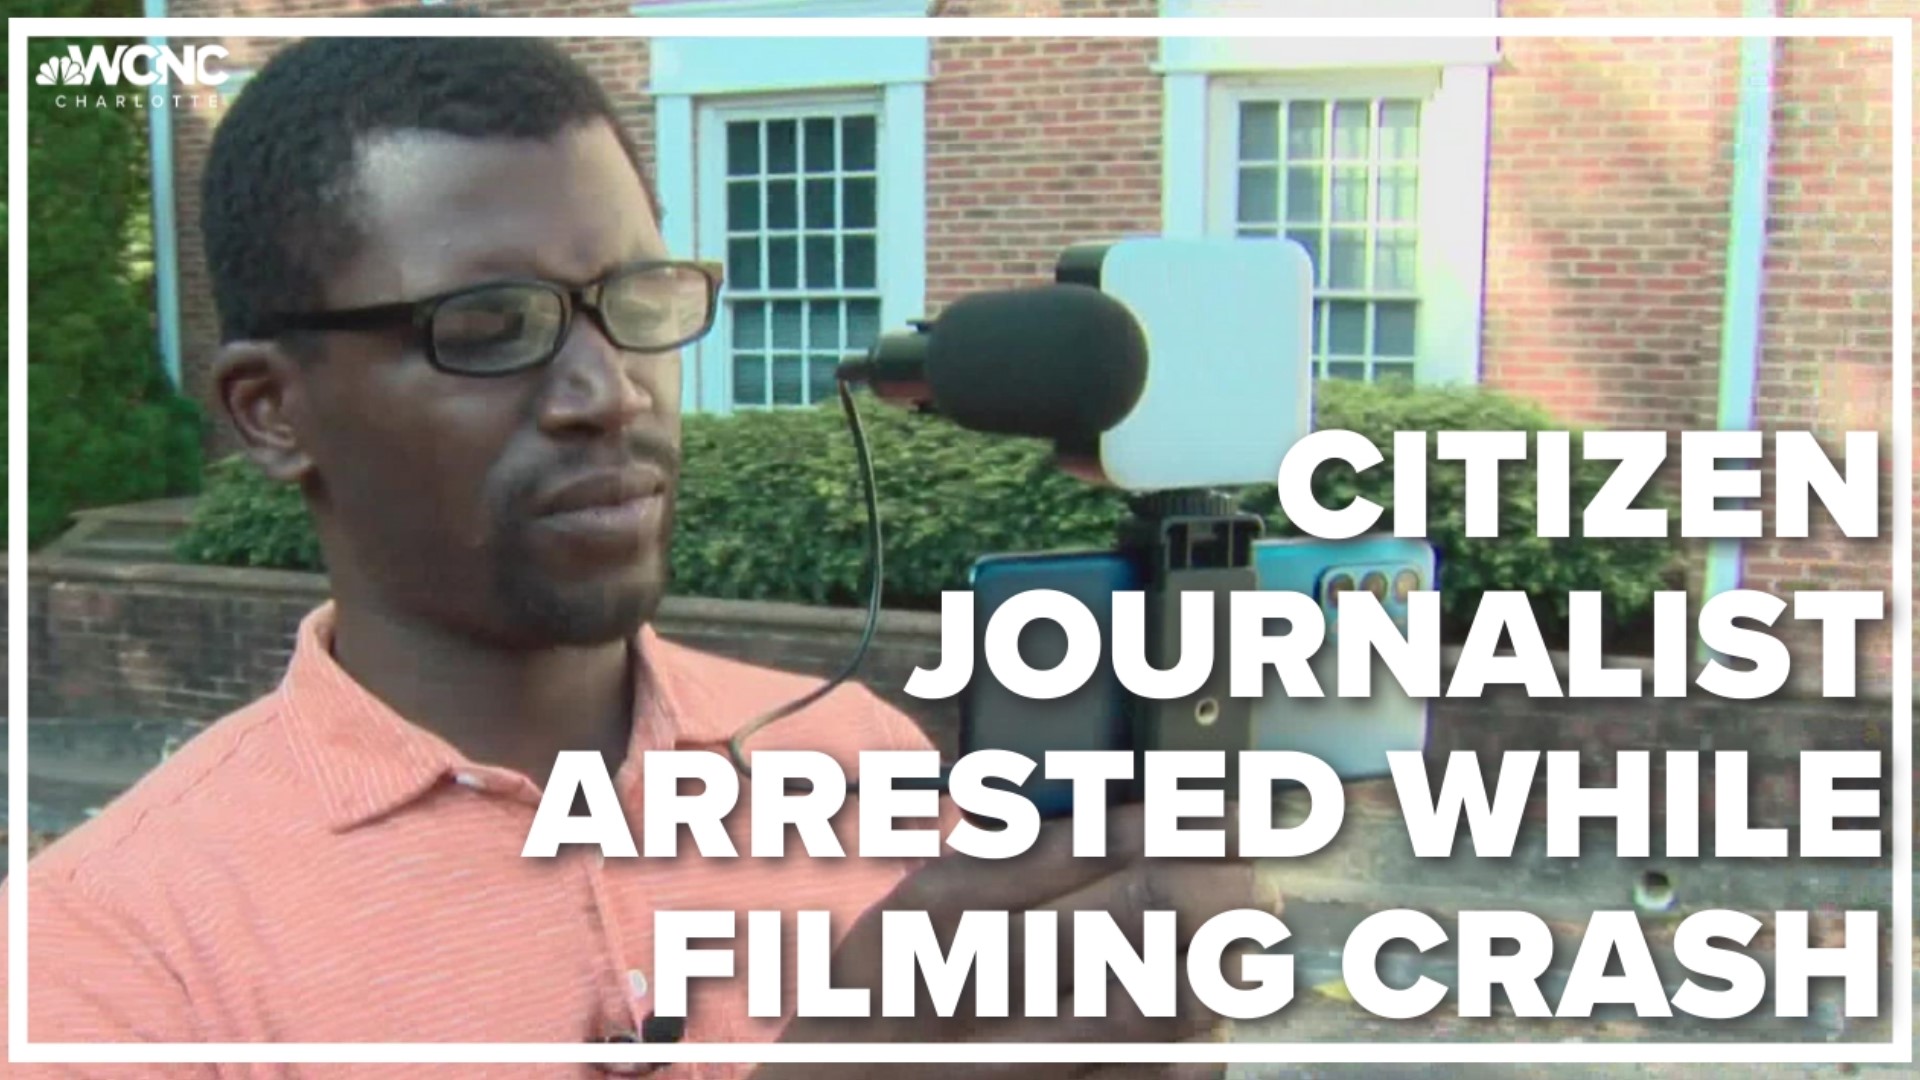 What started with a man filming a routine crash in Gaston County ended with police turning off his camera, charging him with a crime and taking him to jail.